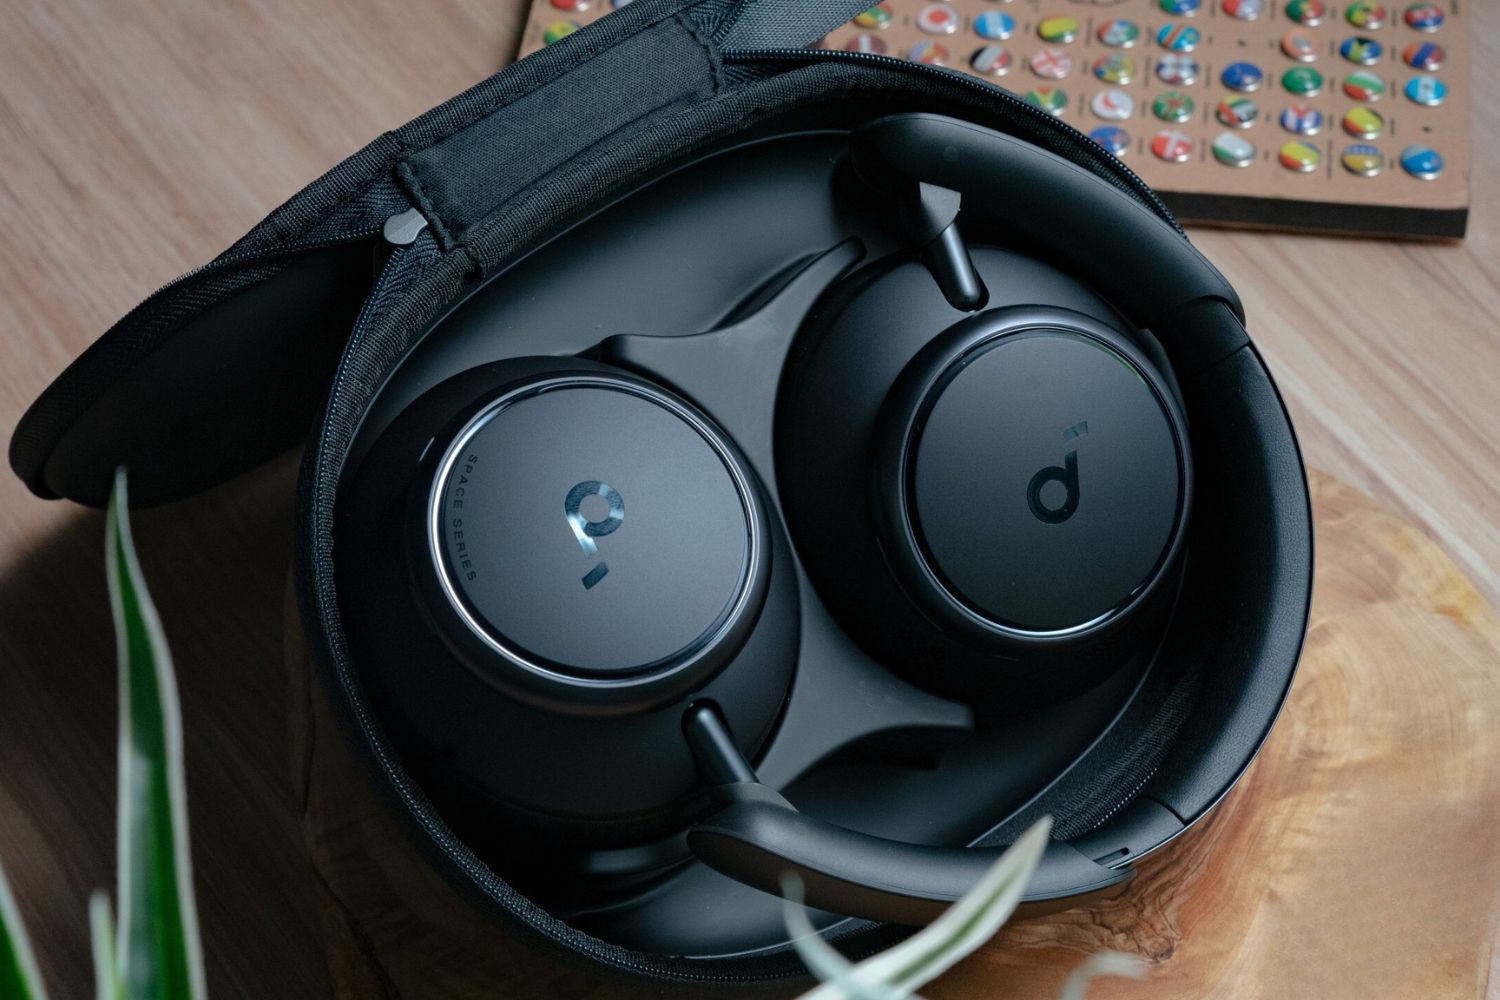 What Are The Best Noise Cancelling Headphones For Airplanes